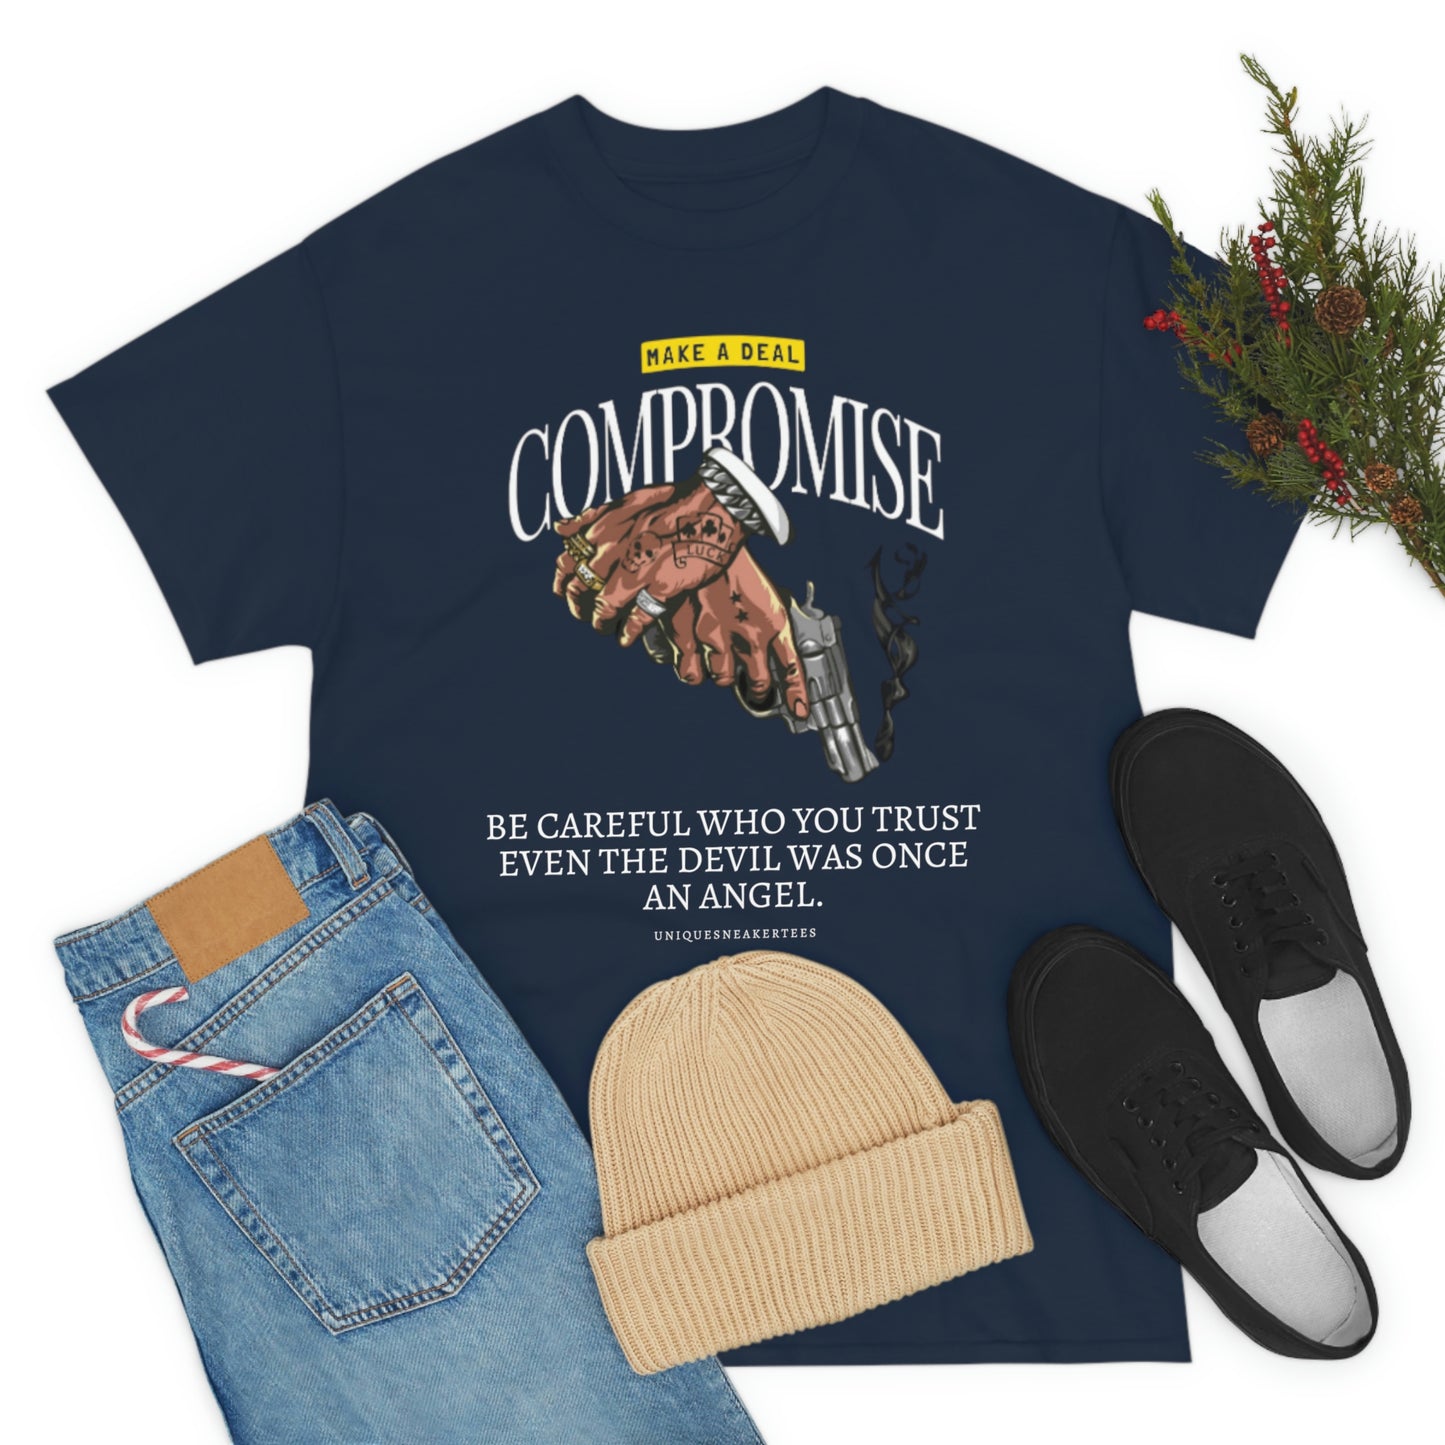 Compromise Tee